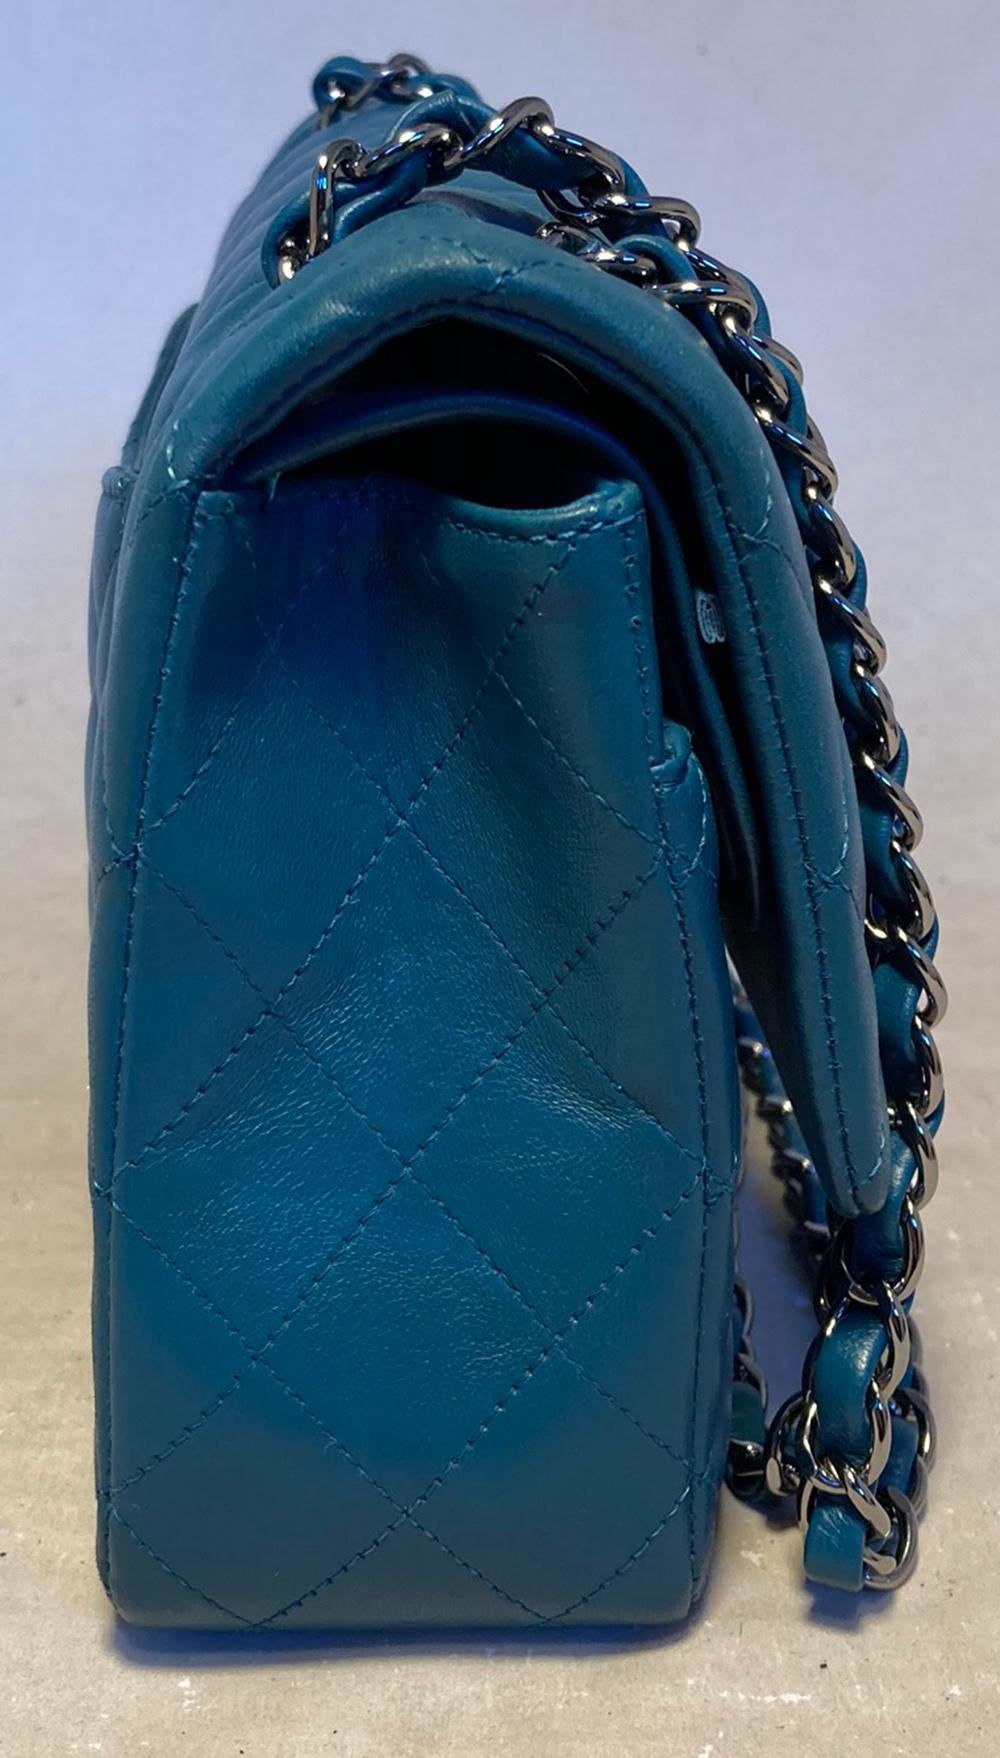 Chanel Teal 10 inch 2.55 Double Flap Classic Shoulder Bag in excellent condition. Teal  quilted lambskin leather exterior trimmed with gunmetal hardware. Signature woven chain and leather shoulder strap can be worn doubled (short) or single (long)